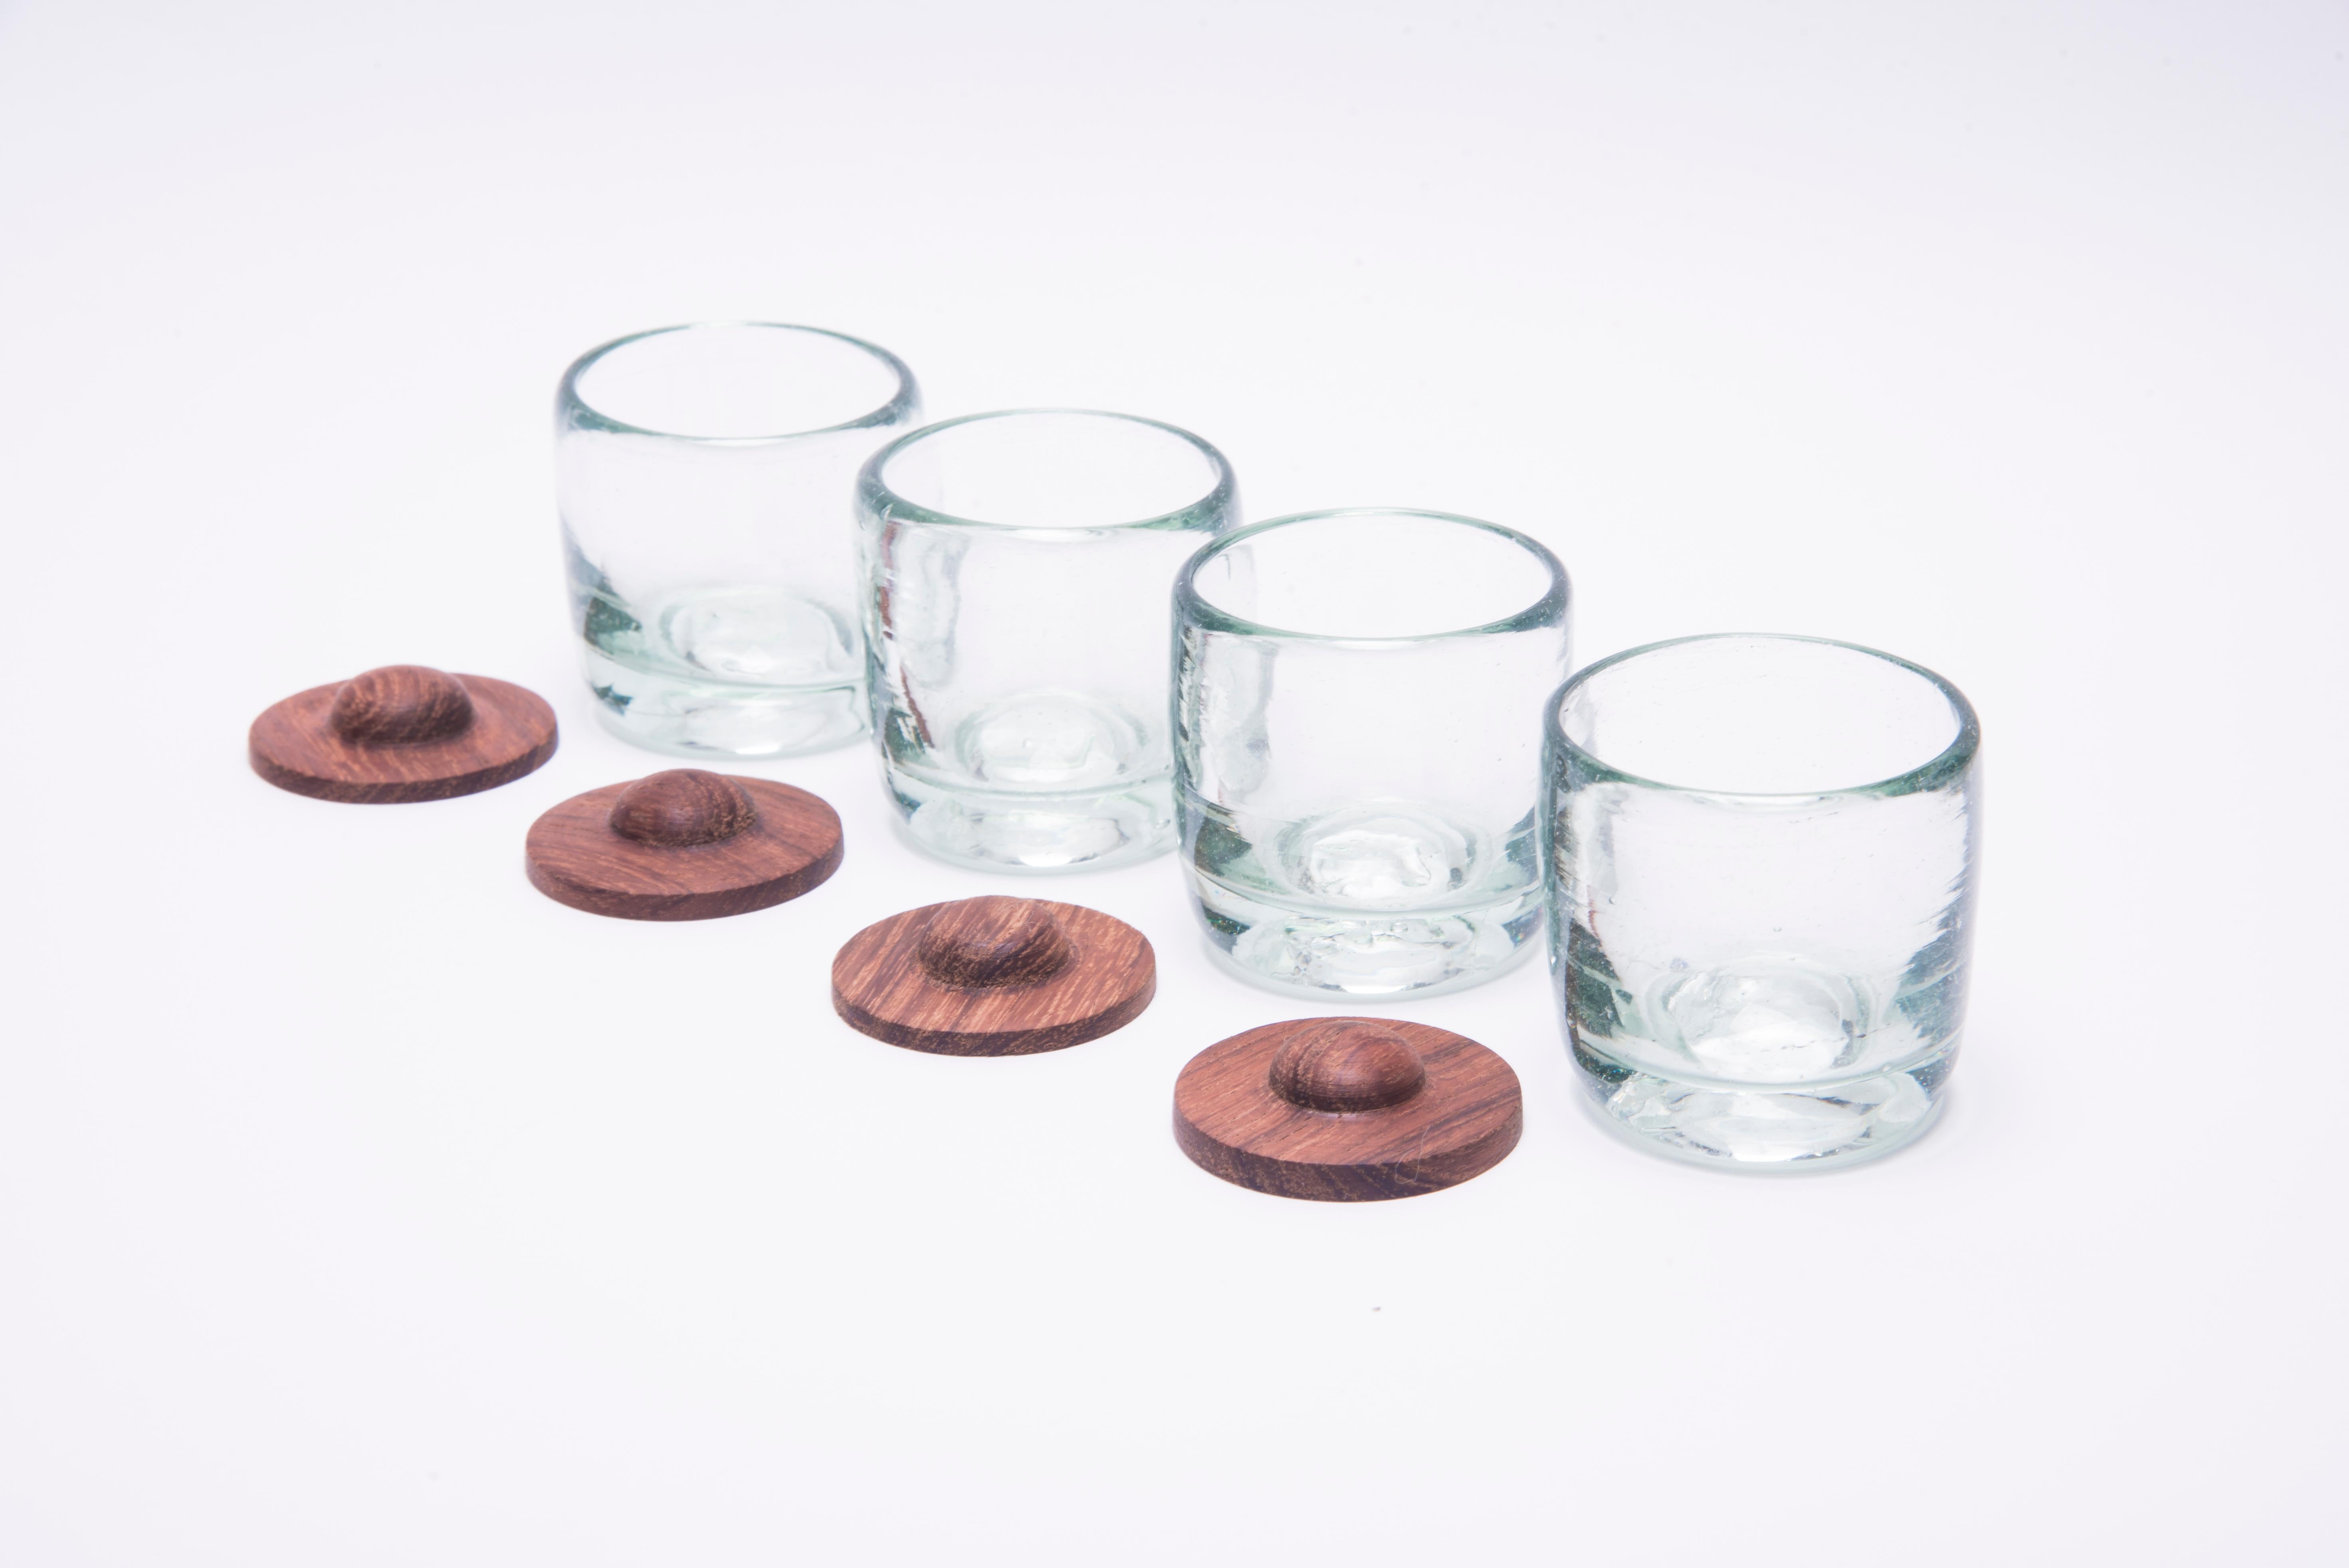 4 Piece Set of Transparent Hand Blown Shot Glasses with Parota Wood Coasters In New Condition For Sale In Zapopan, Jalisco. CP